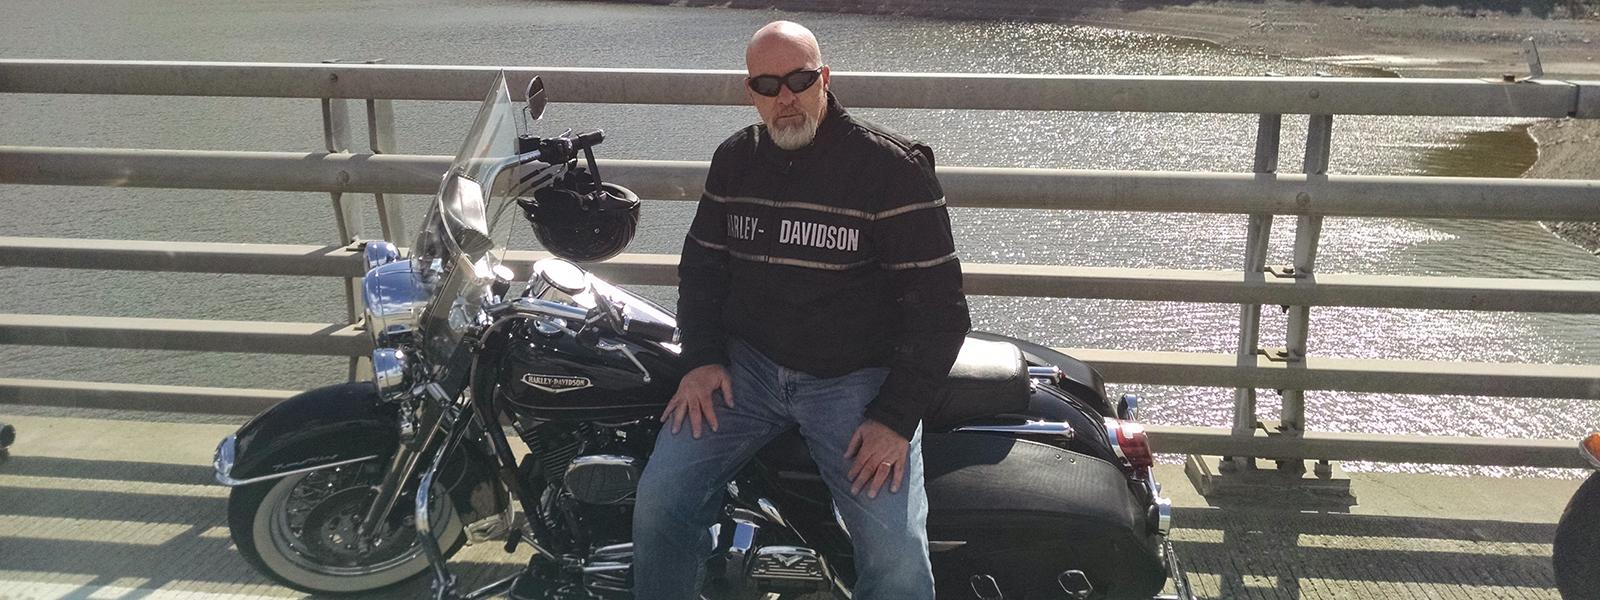 When he is not writing scholarly books, Dr. Stephen Davis relaxes with his Harley-Davidson. (Photo provided)